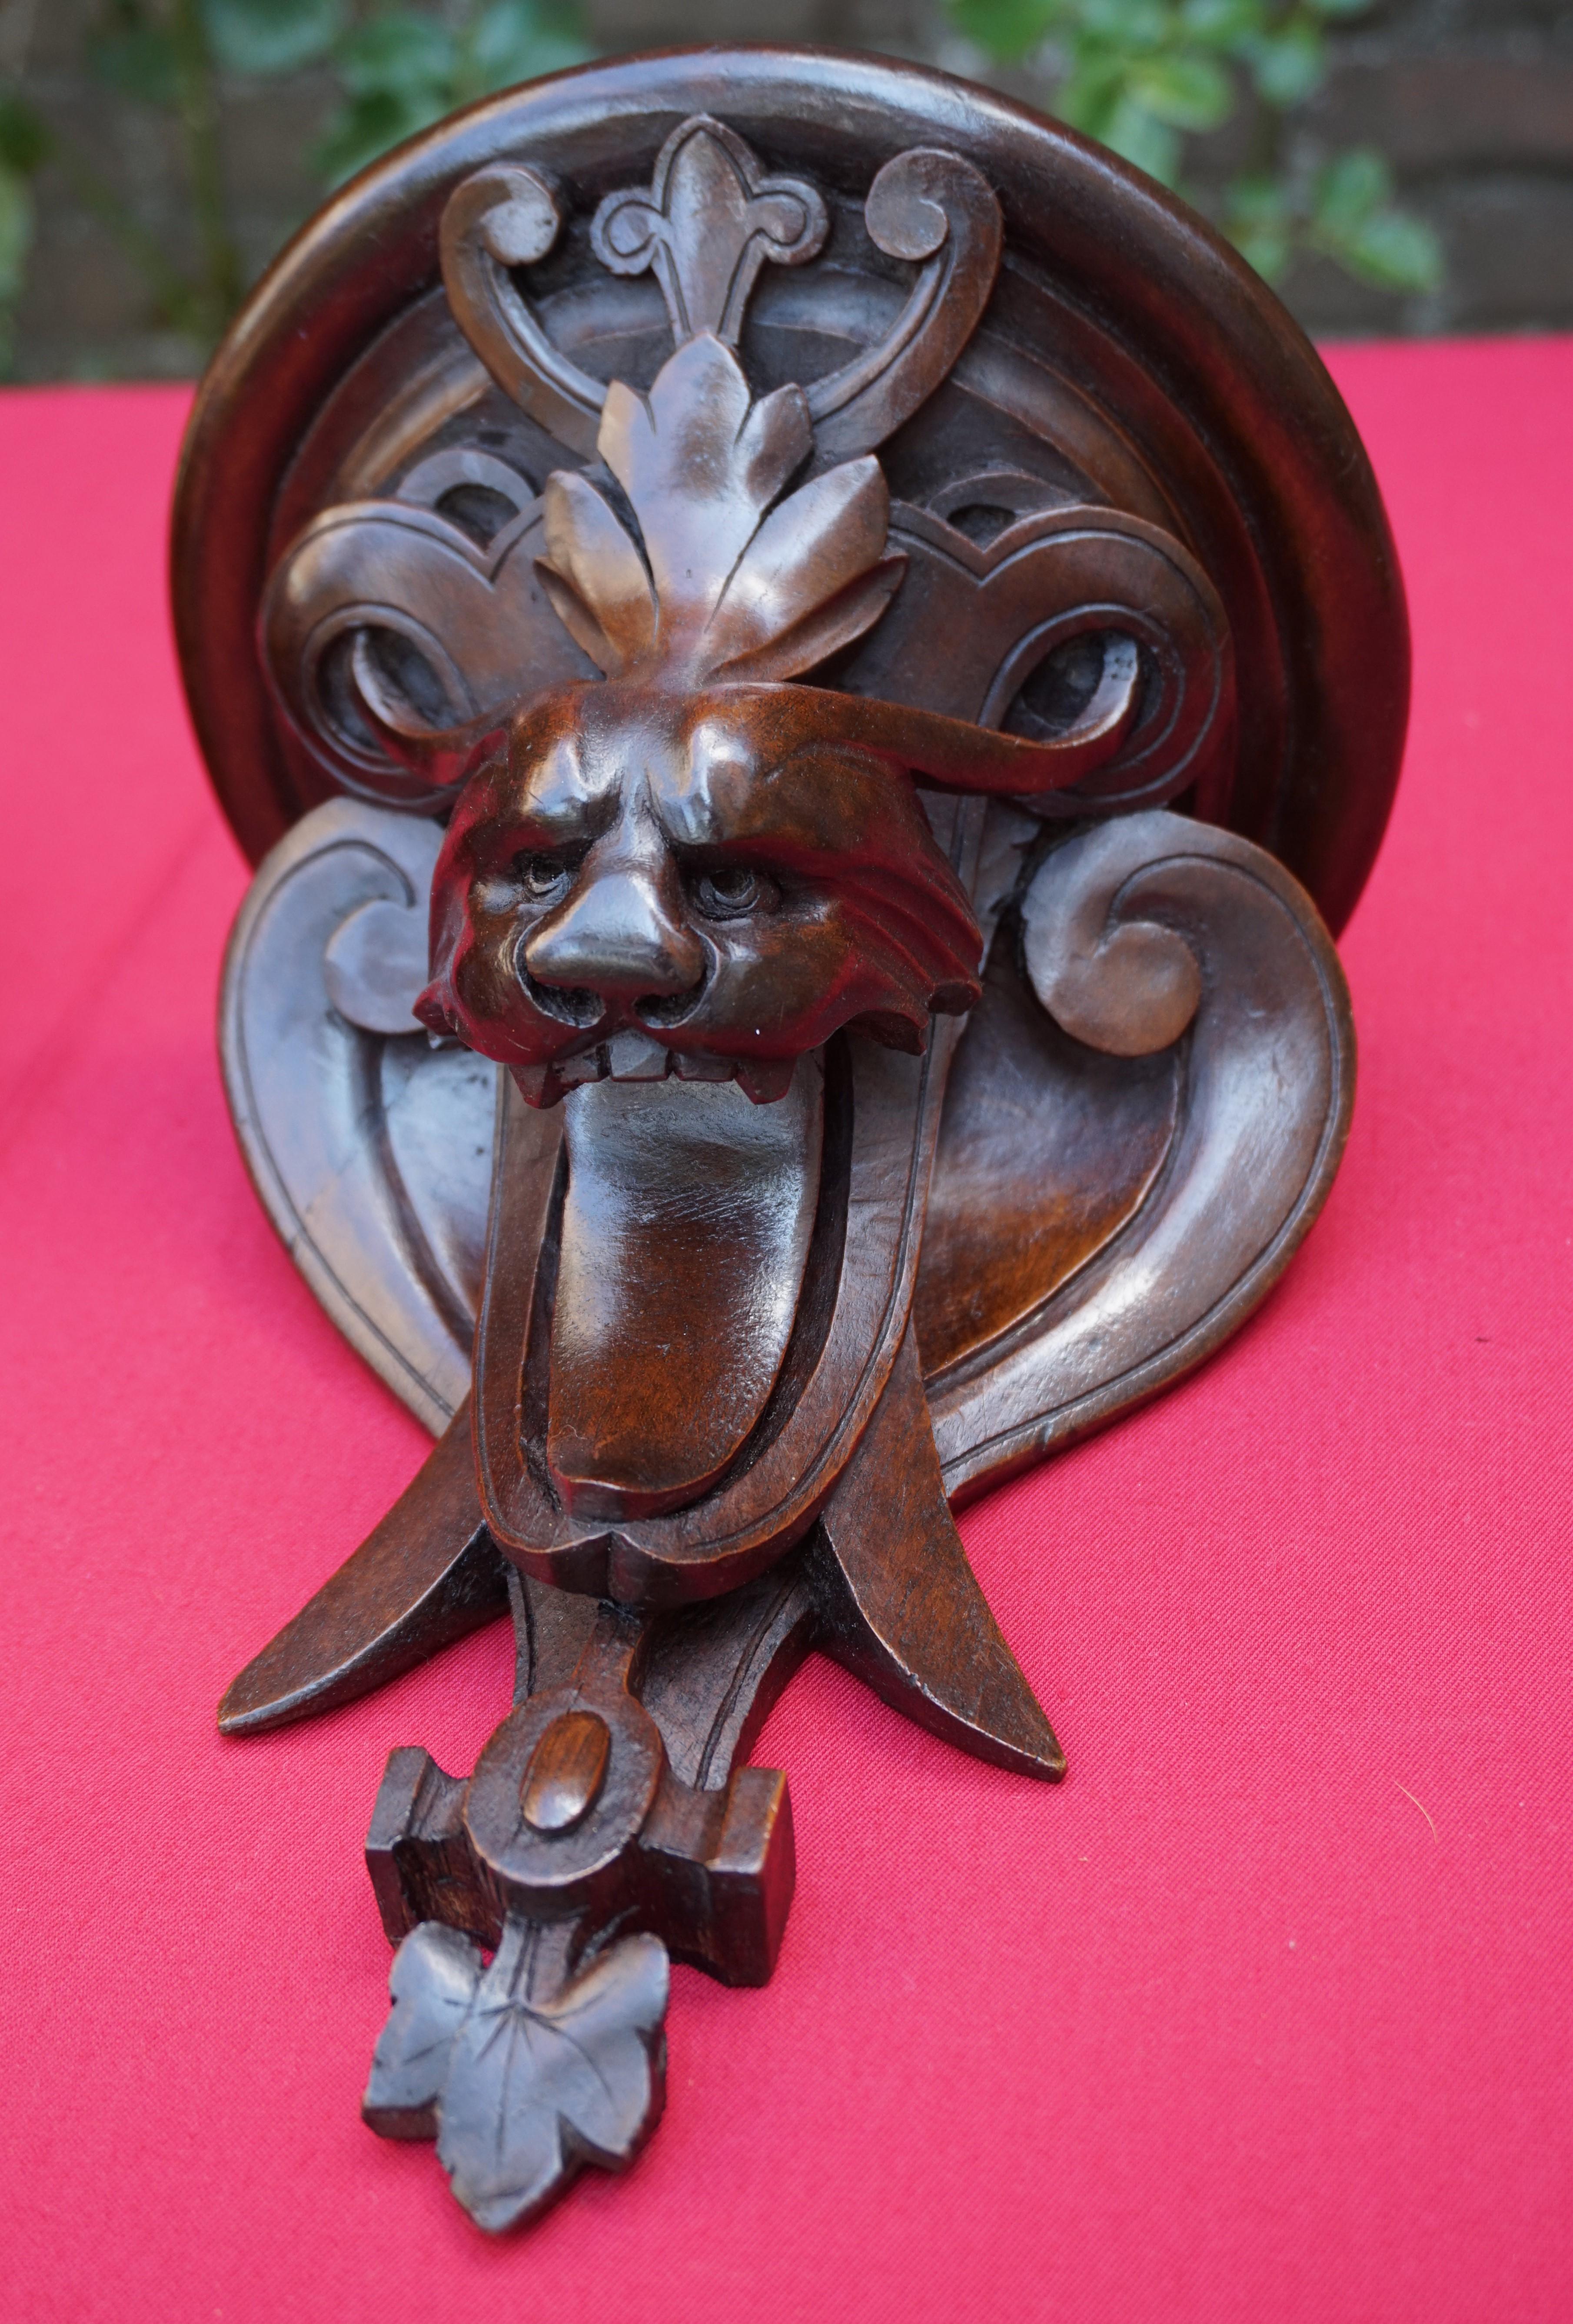 Walnut Rare and Antique Pair of Hand Carved Renaissance Revival Grotesque Wall Brackets For Sale